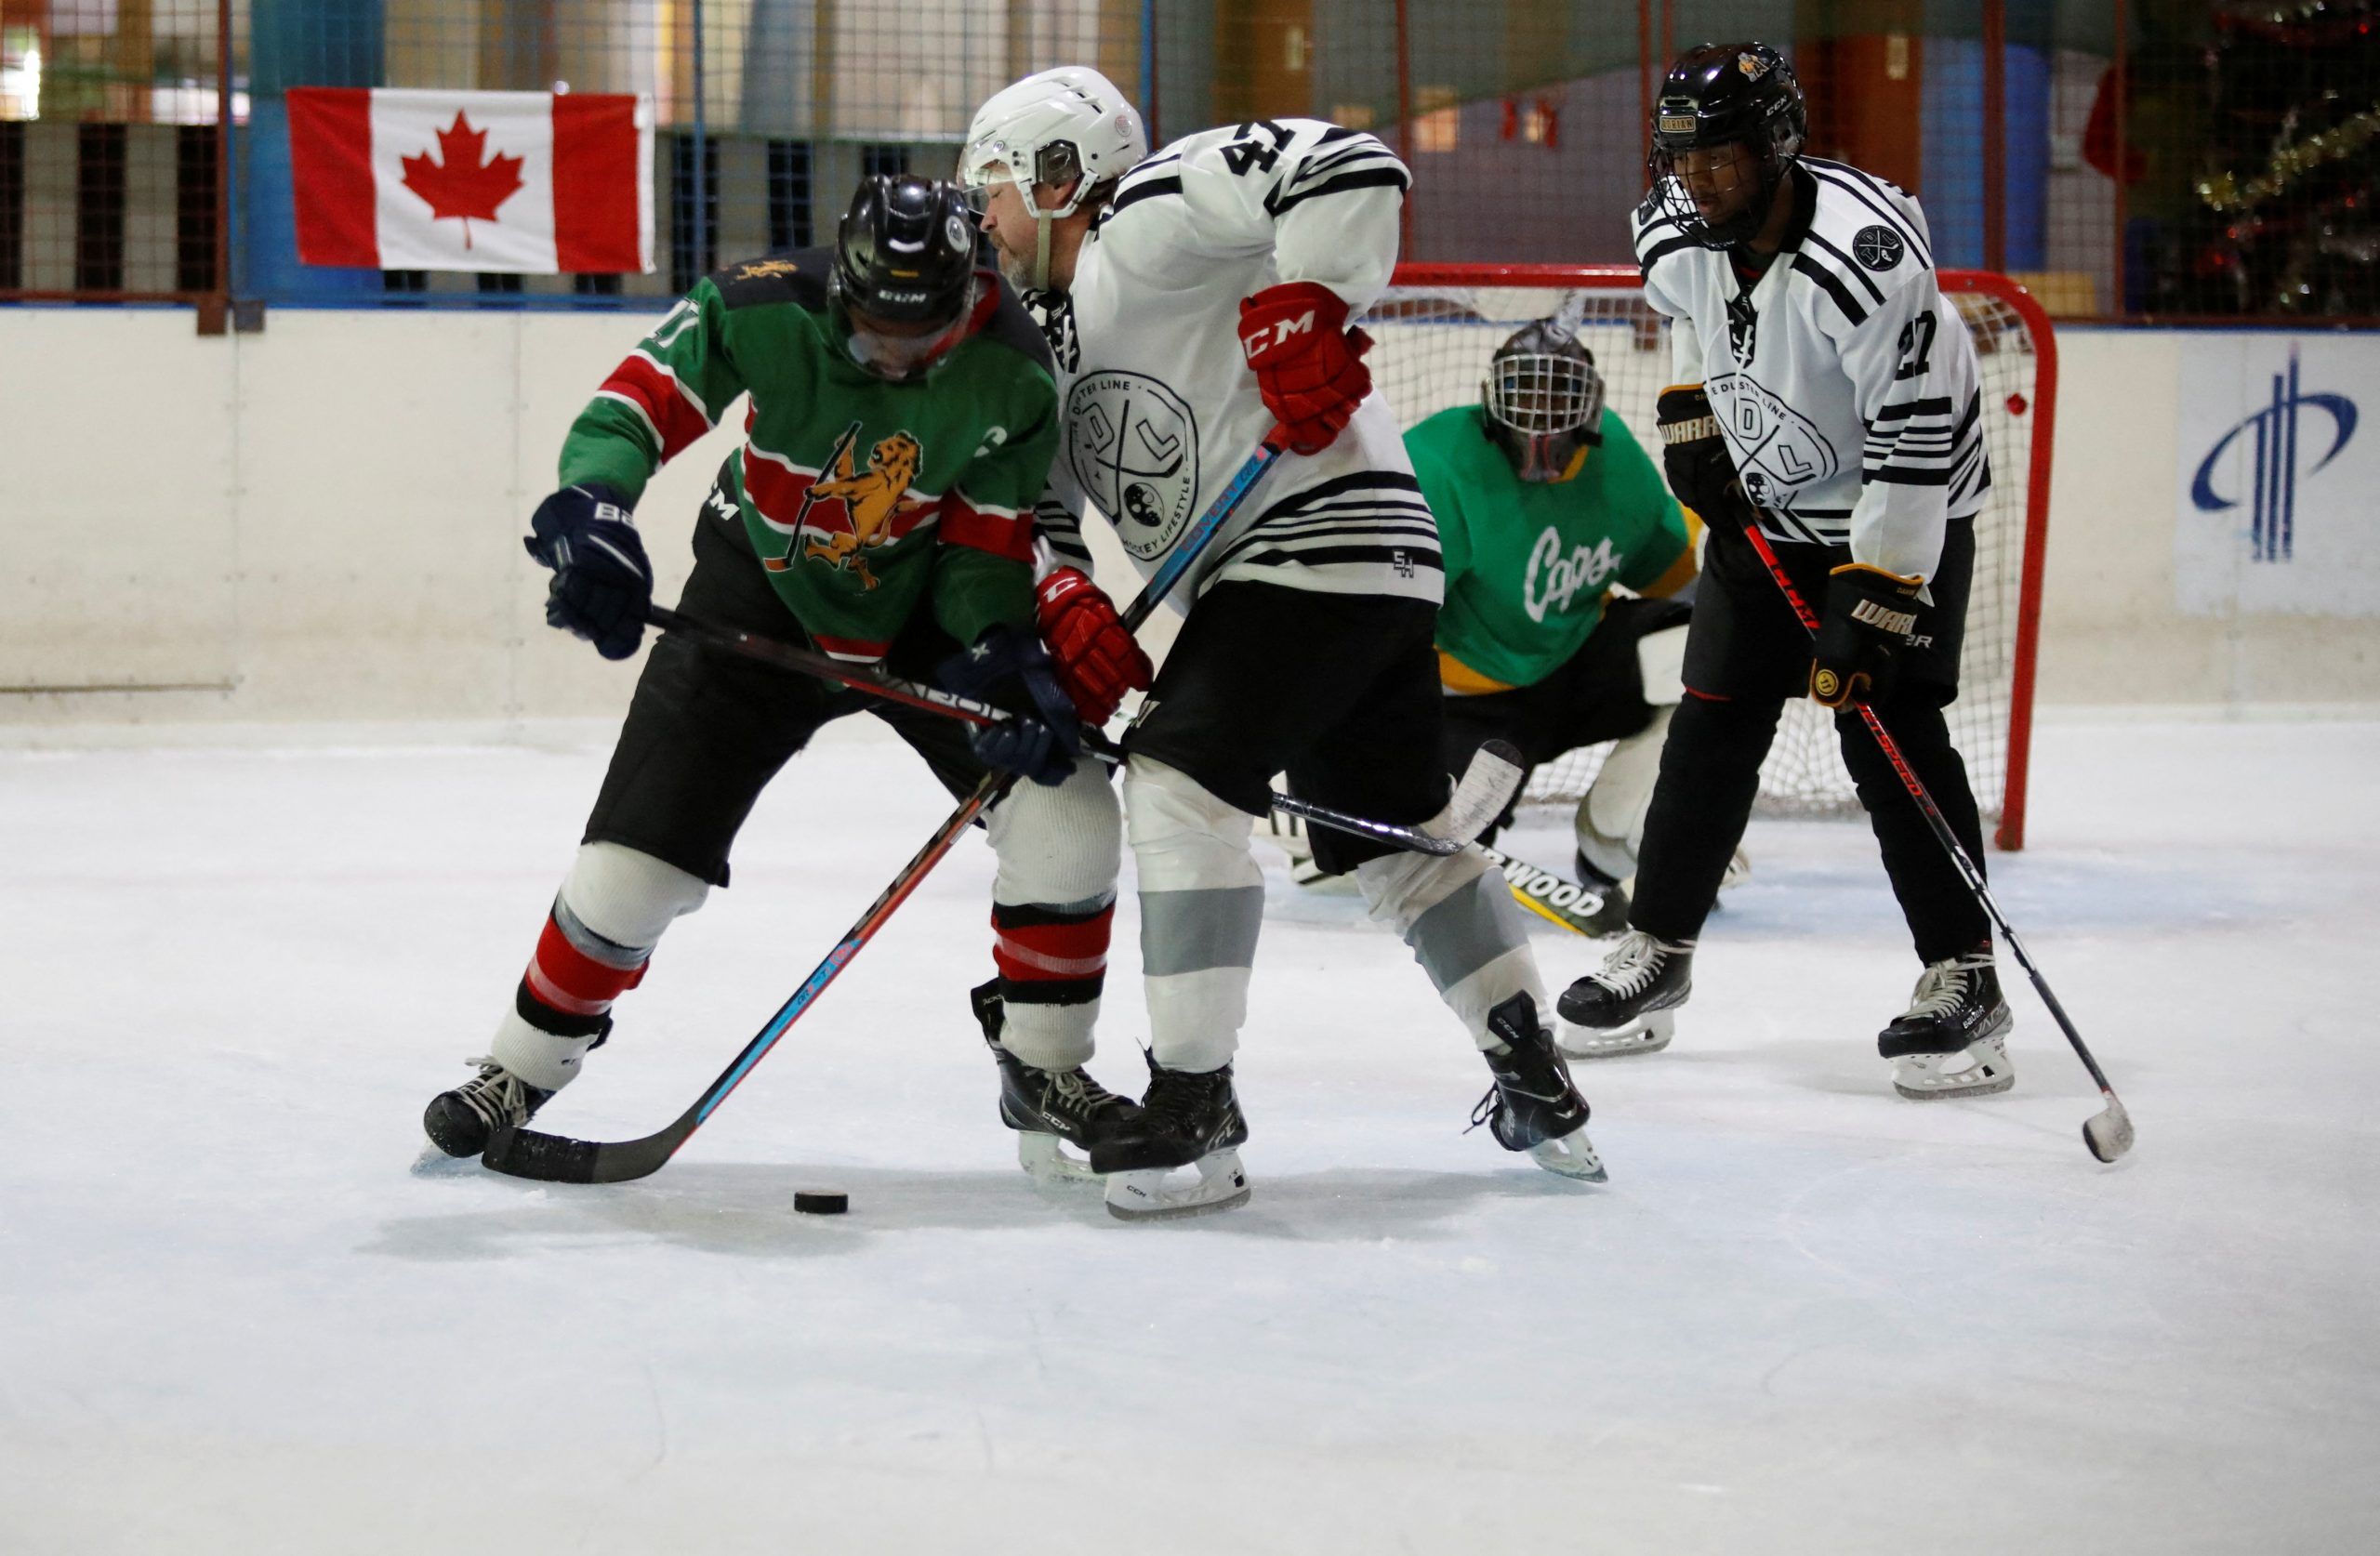 From Kenya to Canada: The Story of Kenya's Only Ice Hockey Team